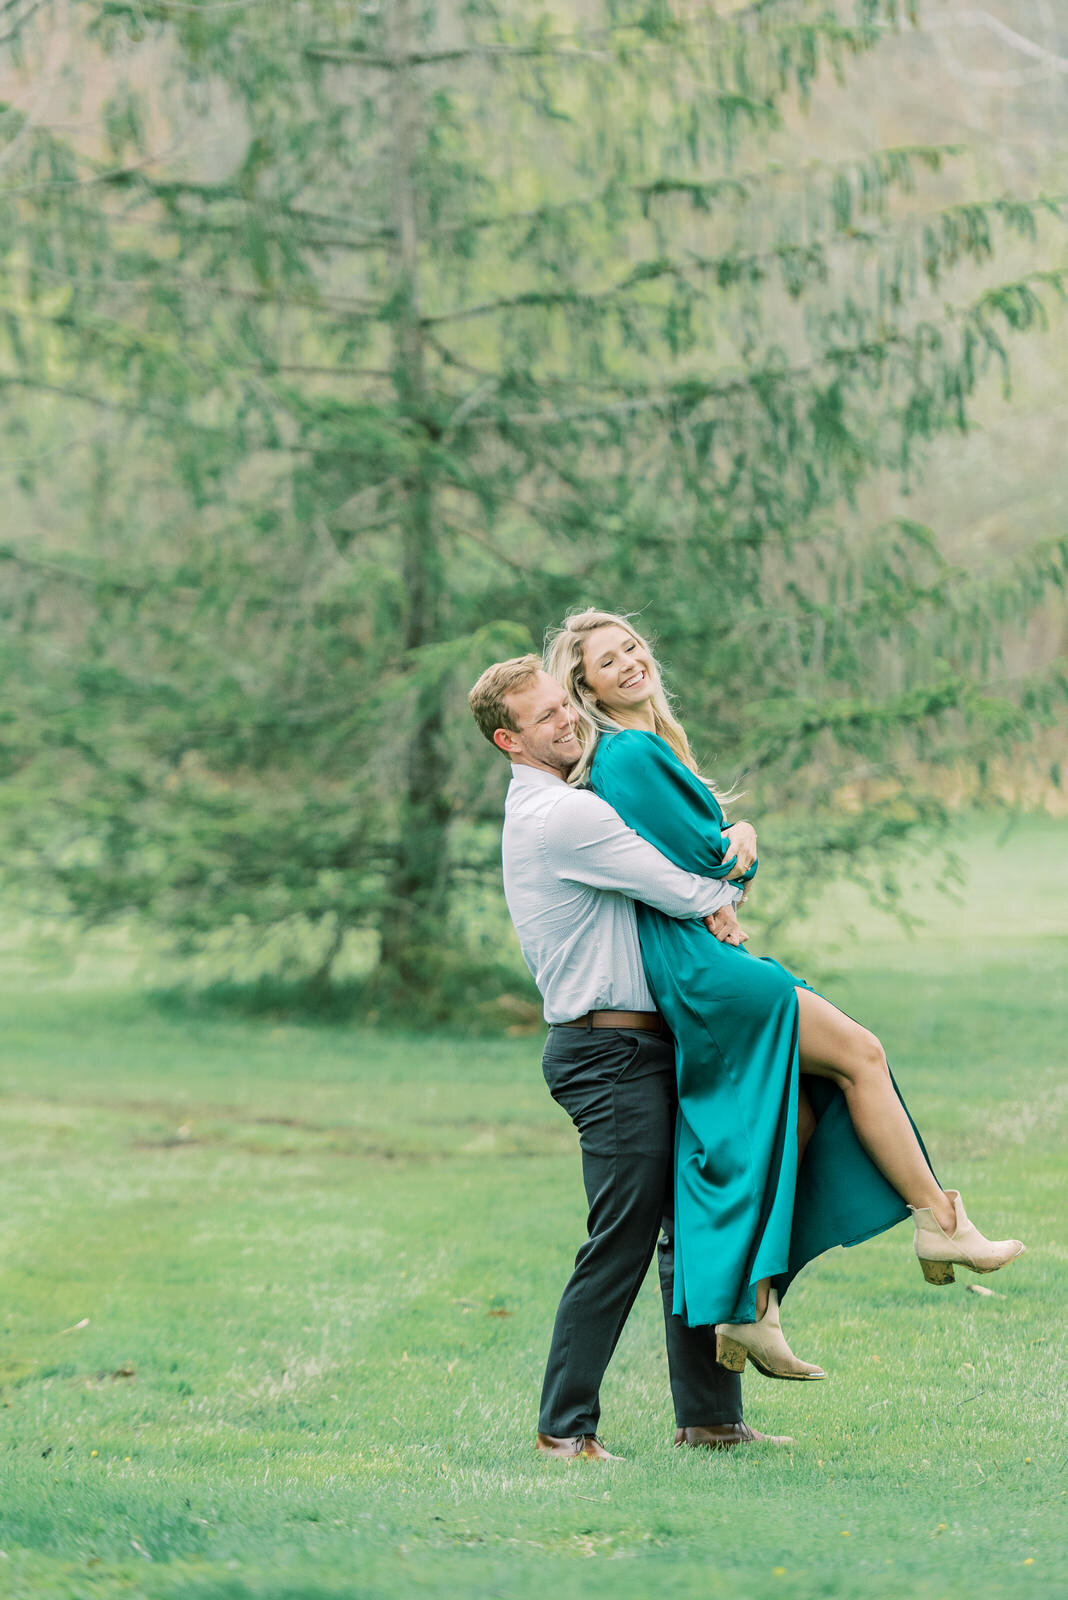  Playful couple has fun durning their Engagement photos taken at Westmoreland County 